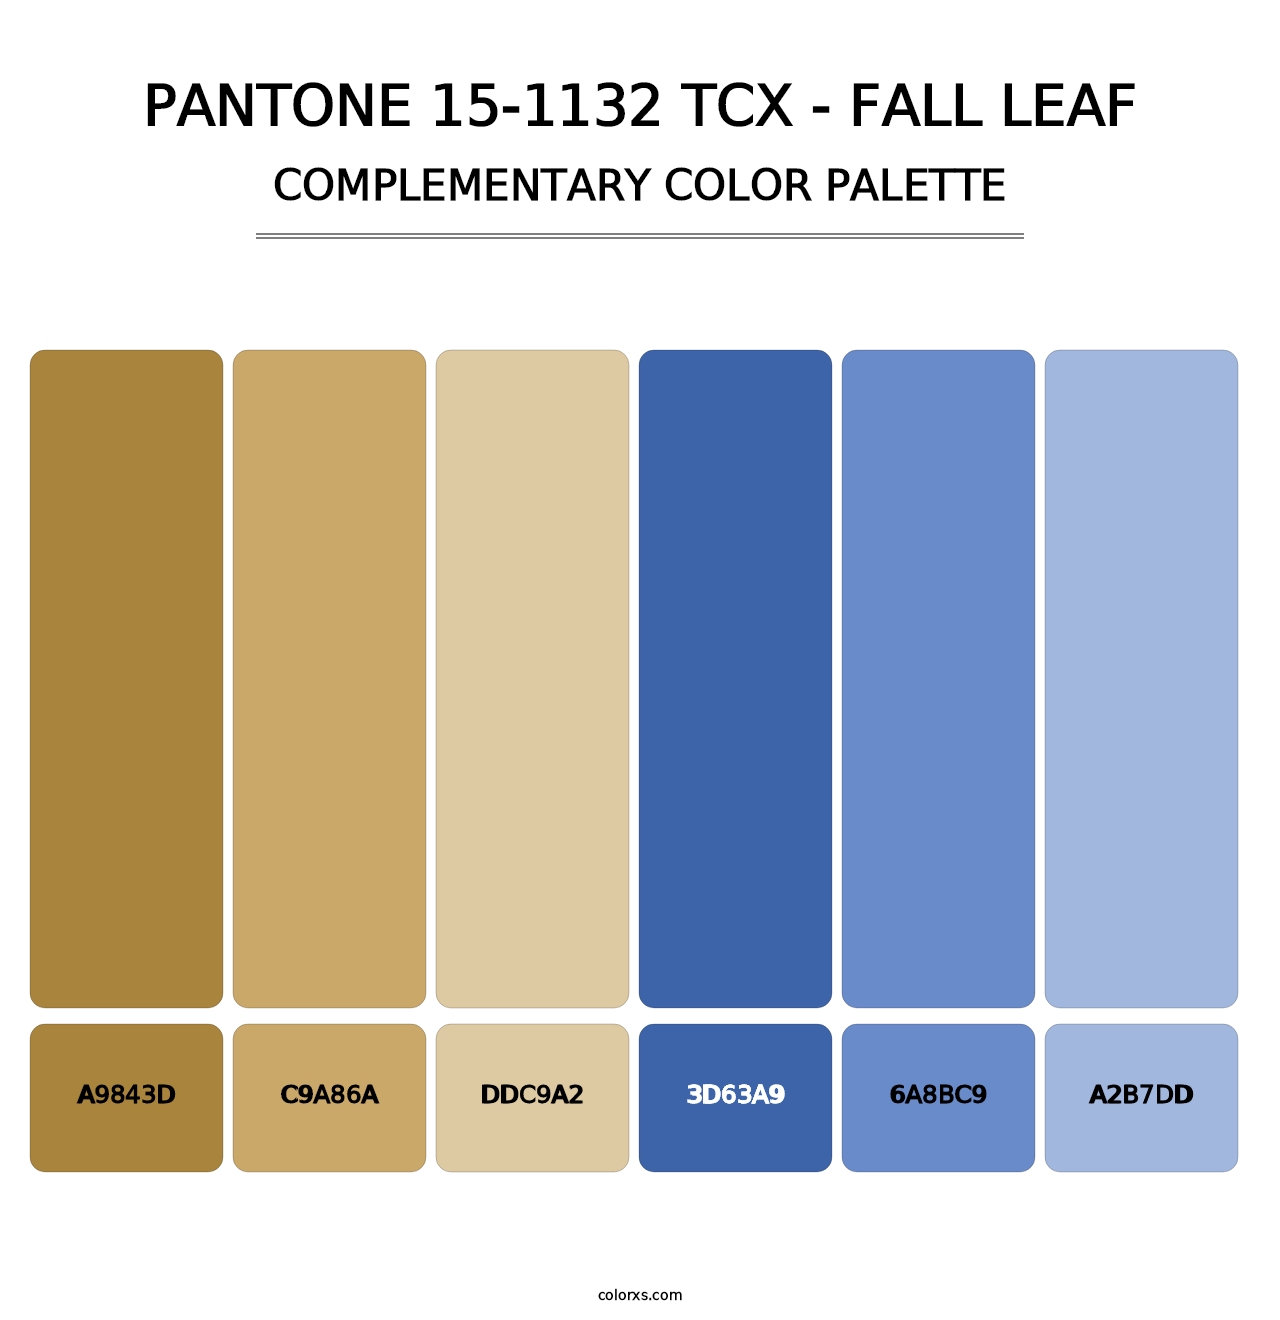 PANTONE 15-1132 TCX - Fall Leaf - Complementary Color Palette